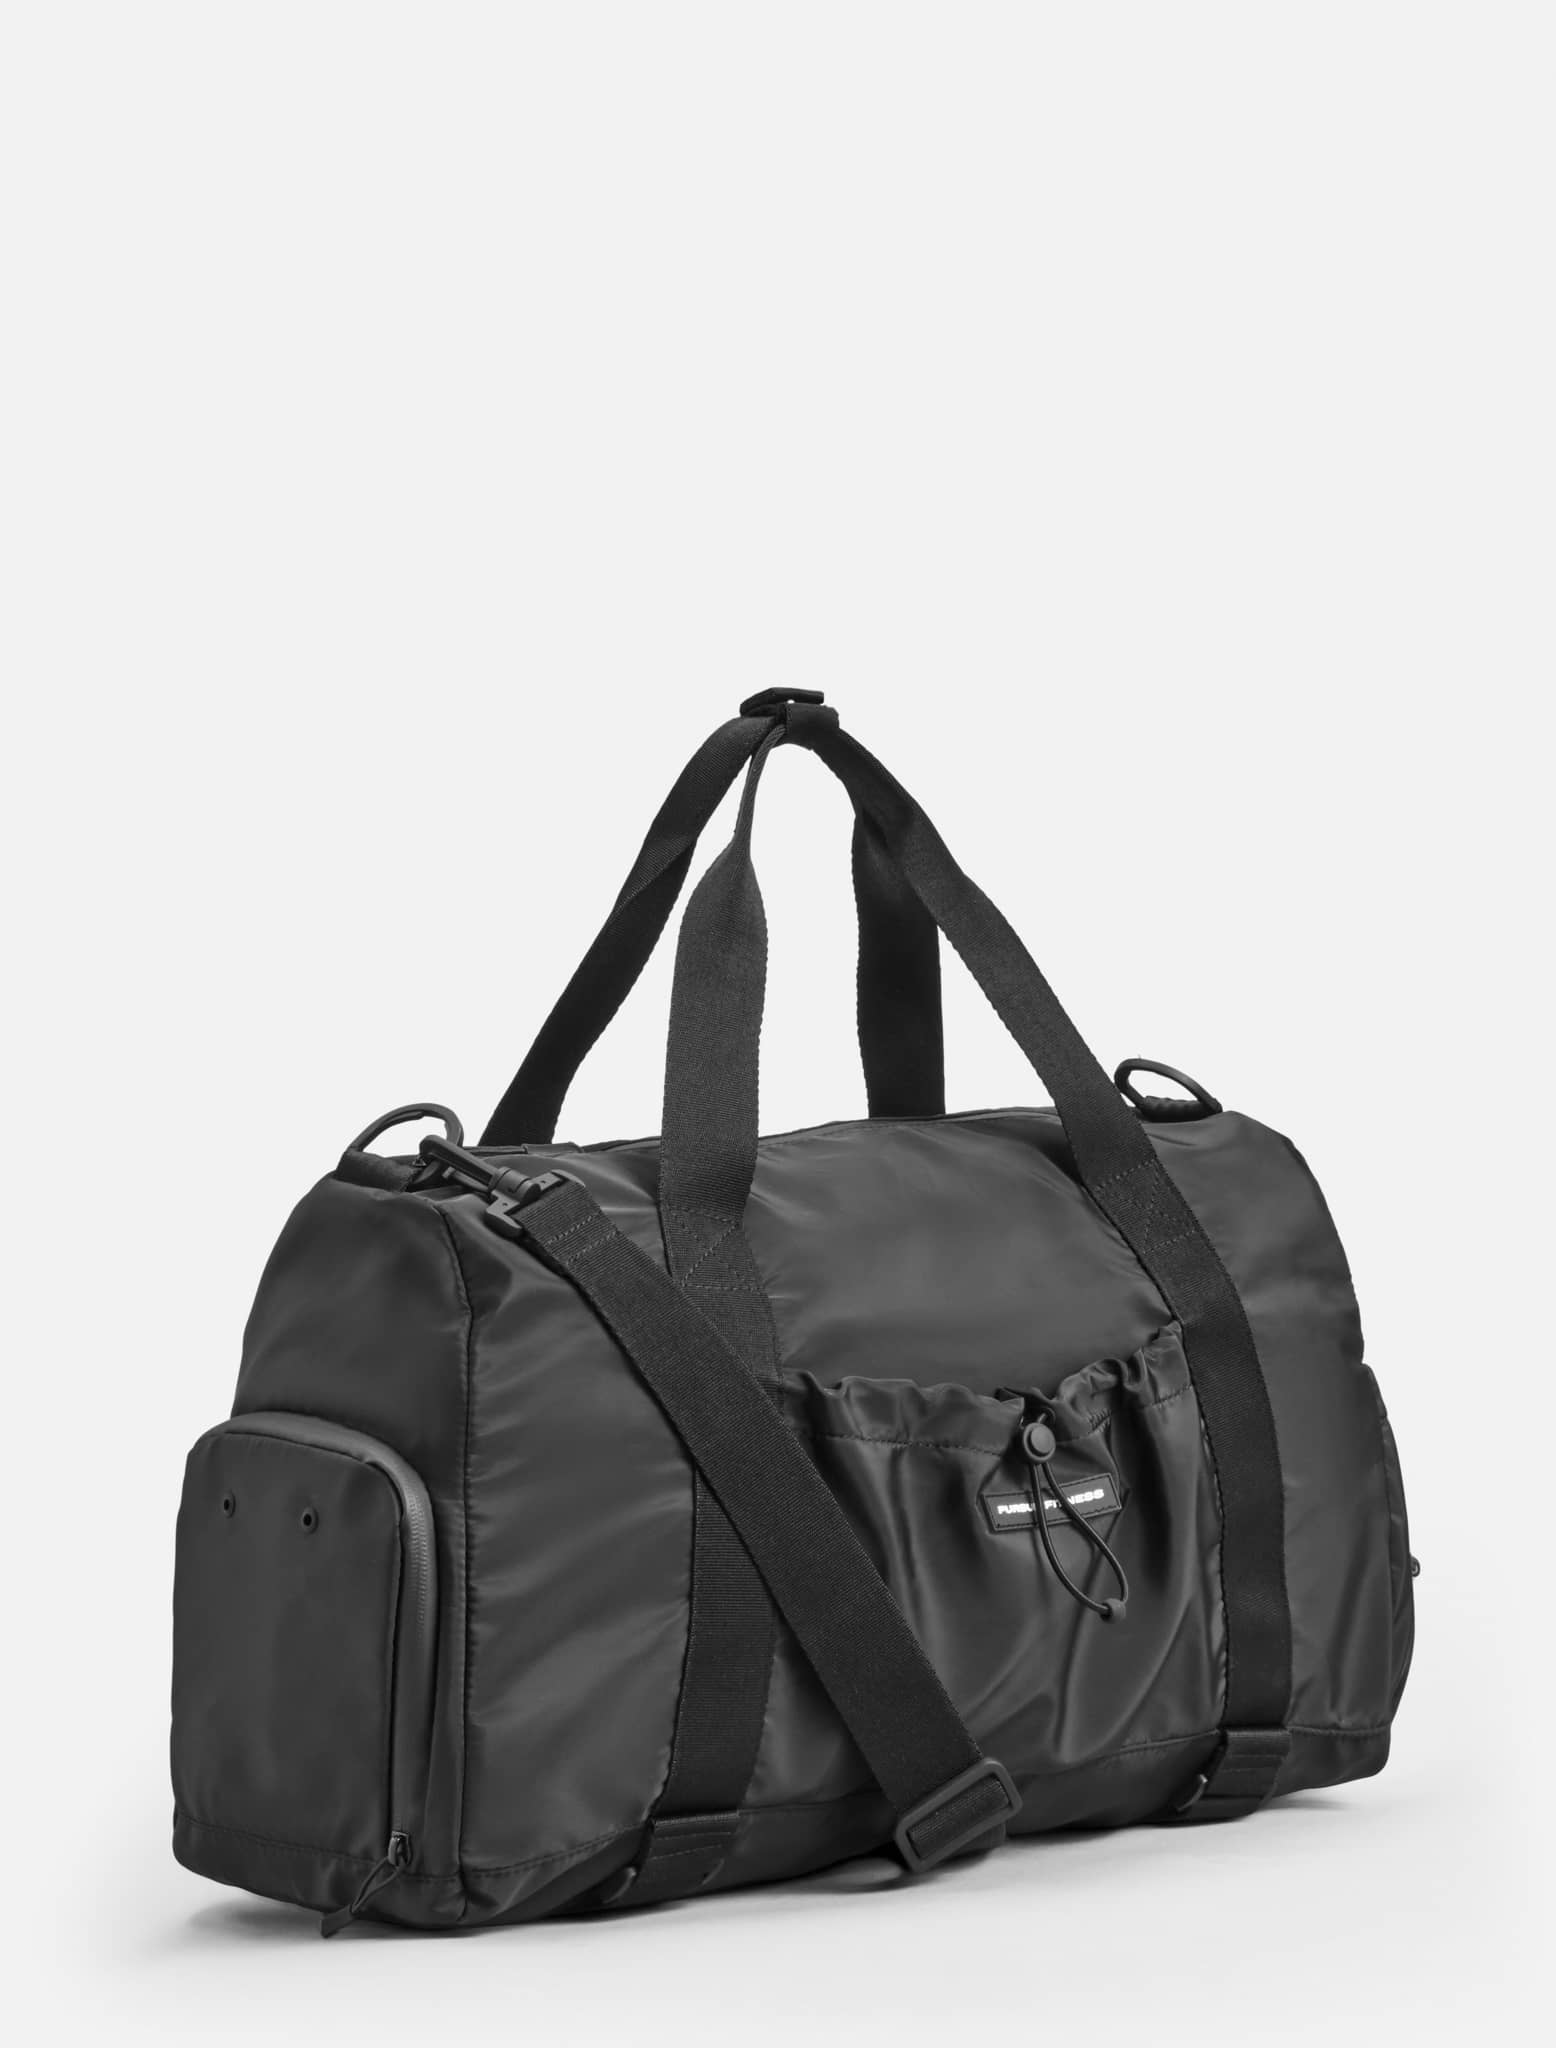 The Holdall / Black Pursue Fitness 5